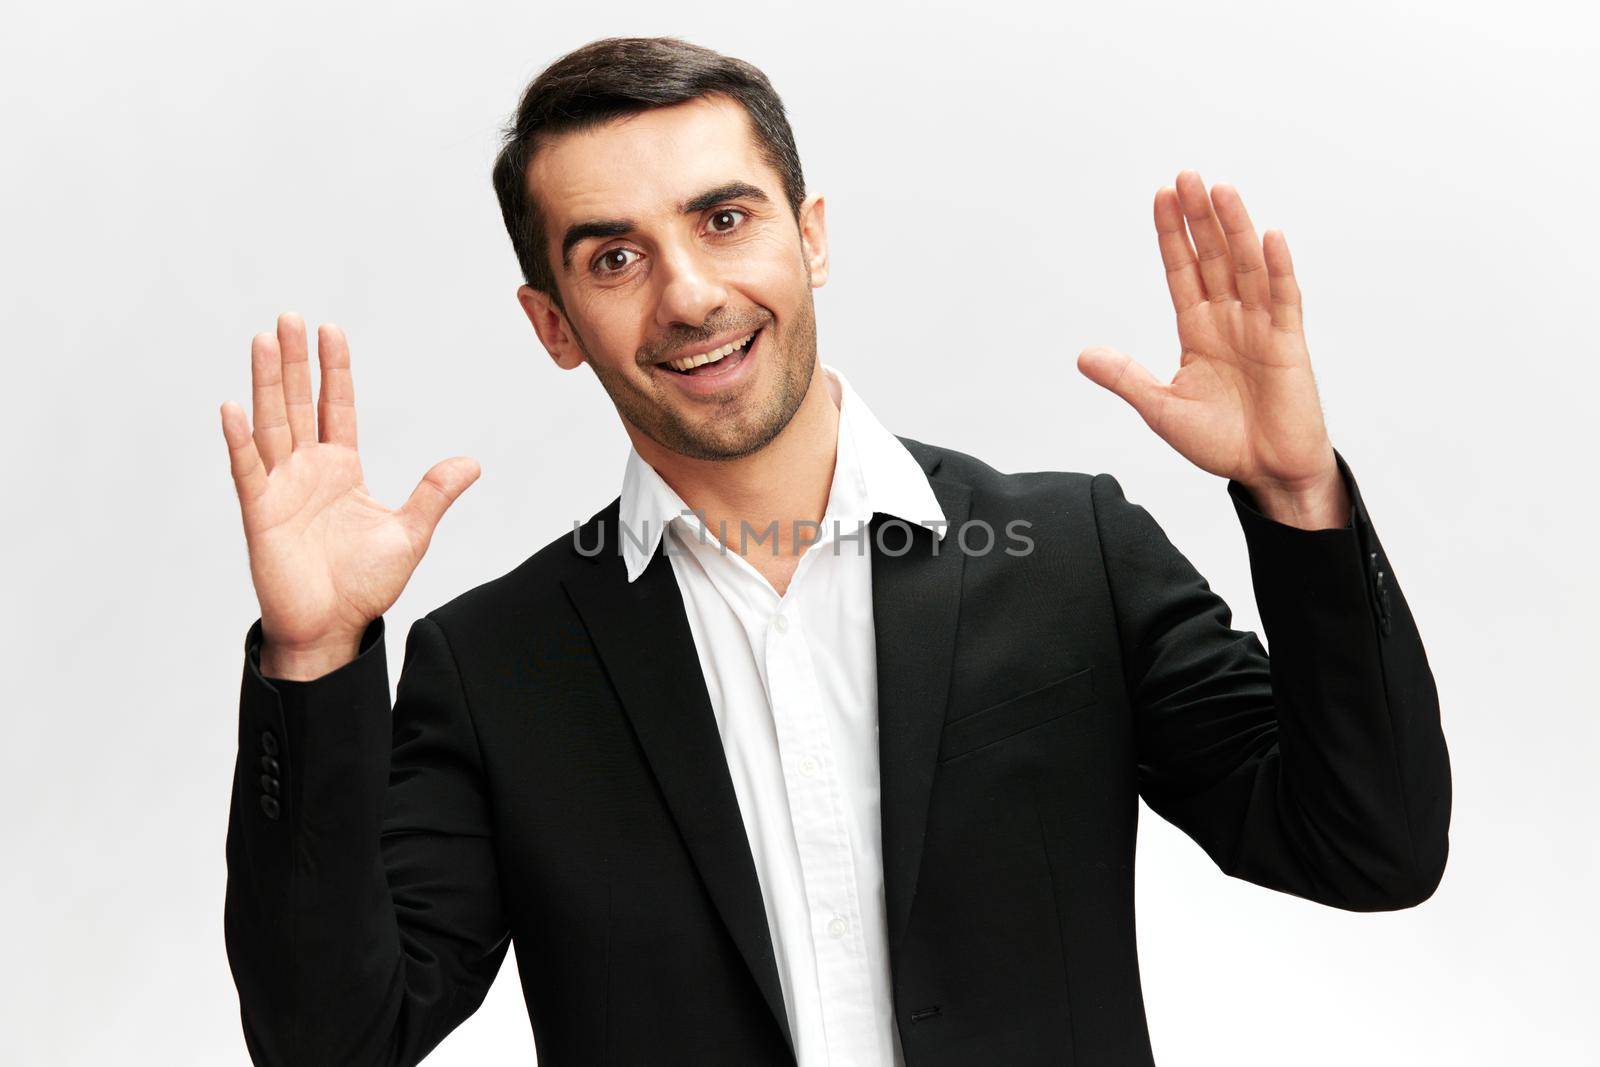 man black suit hand gestures emotions business and office concept. High quality photo